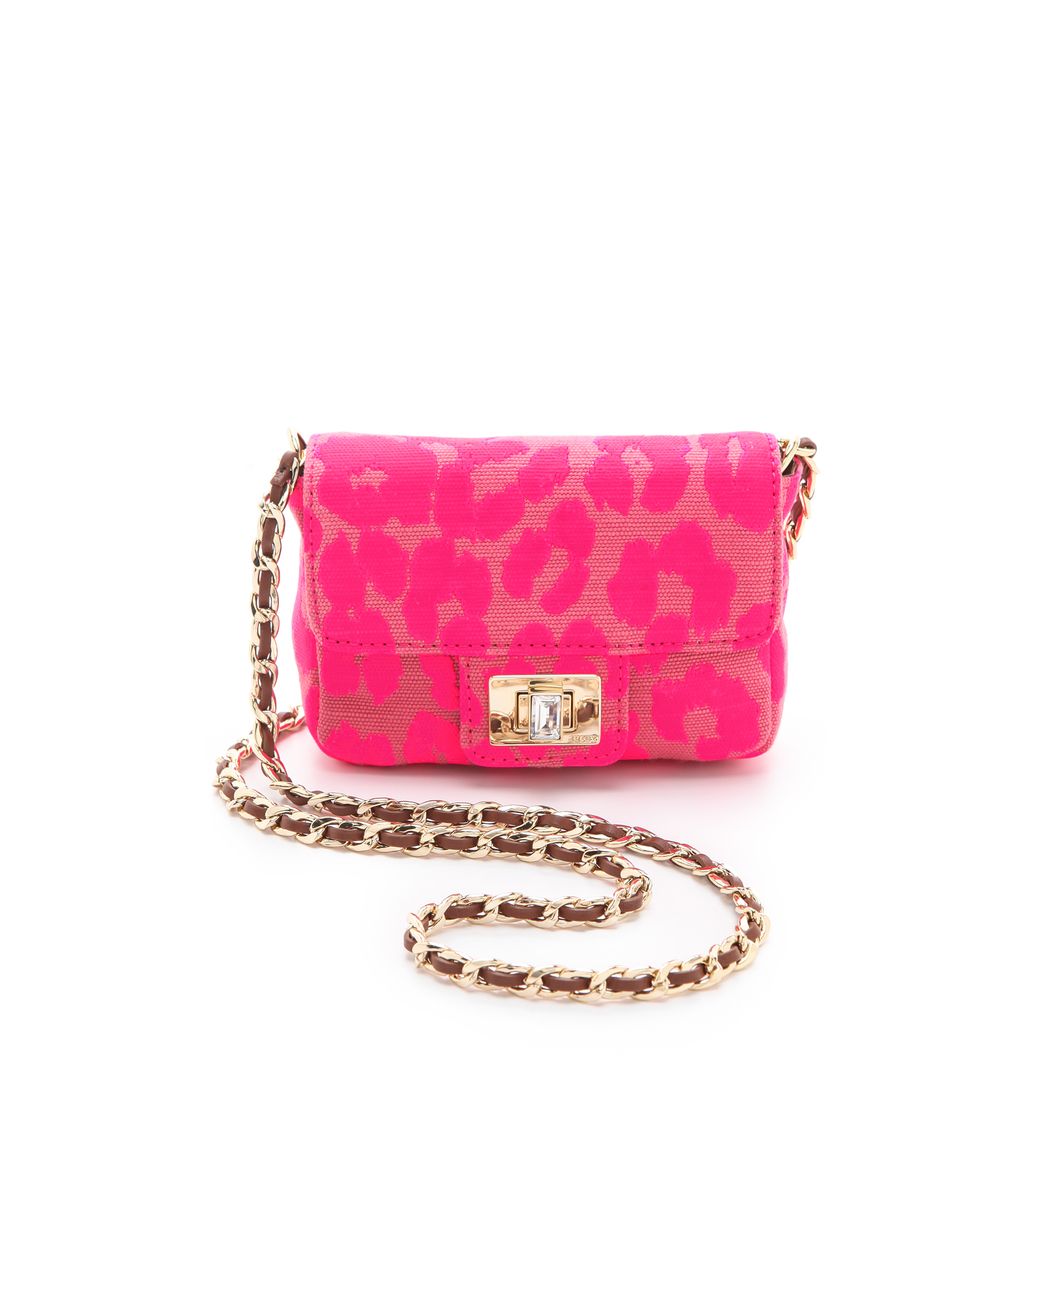 Juicy Couture Mini Gretchen Shoulder Bag in Pink | Lyst